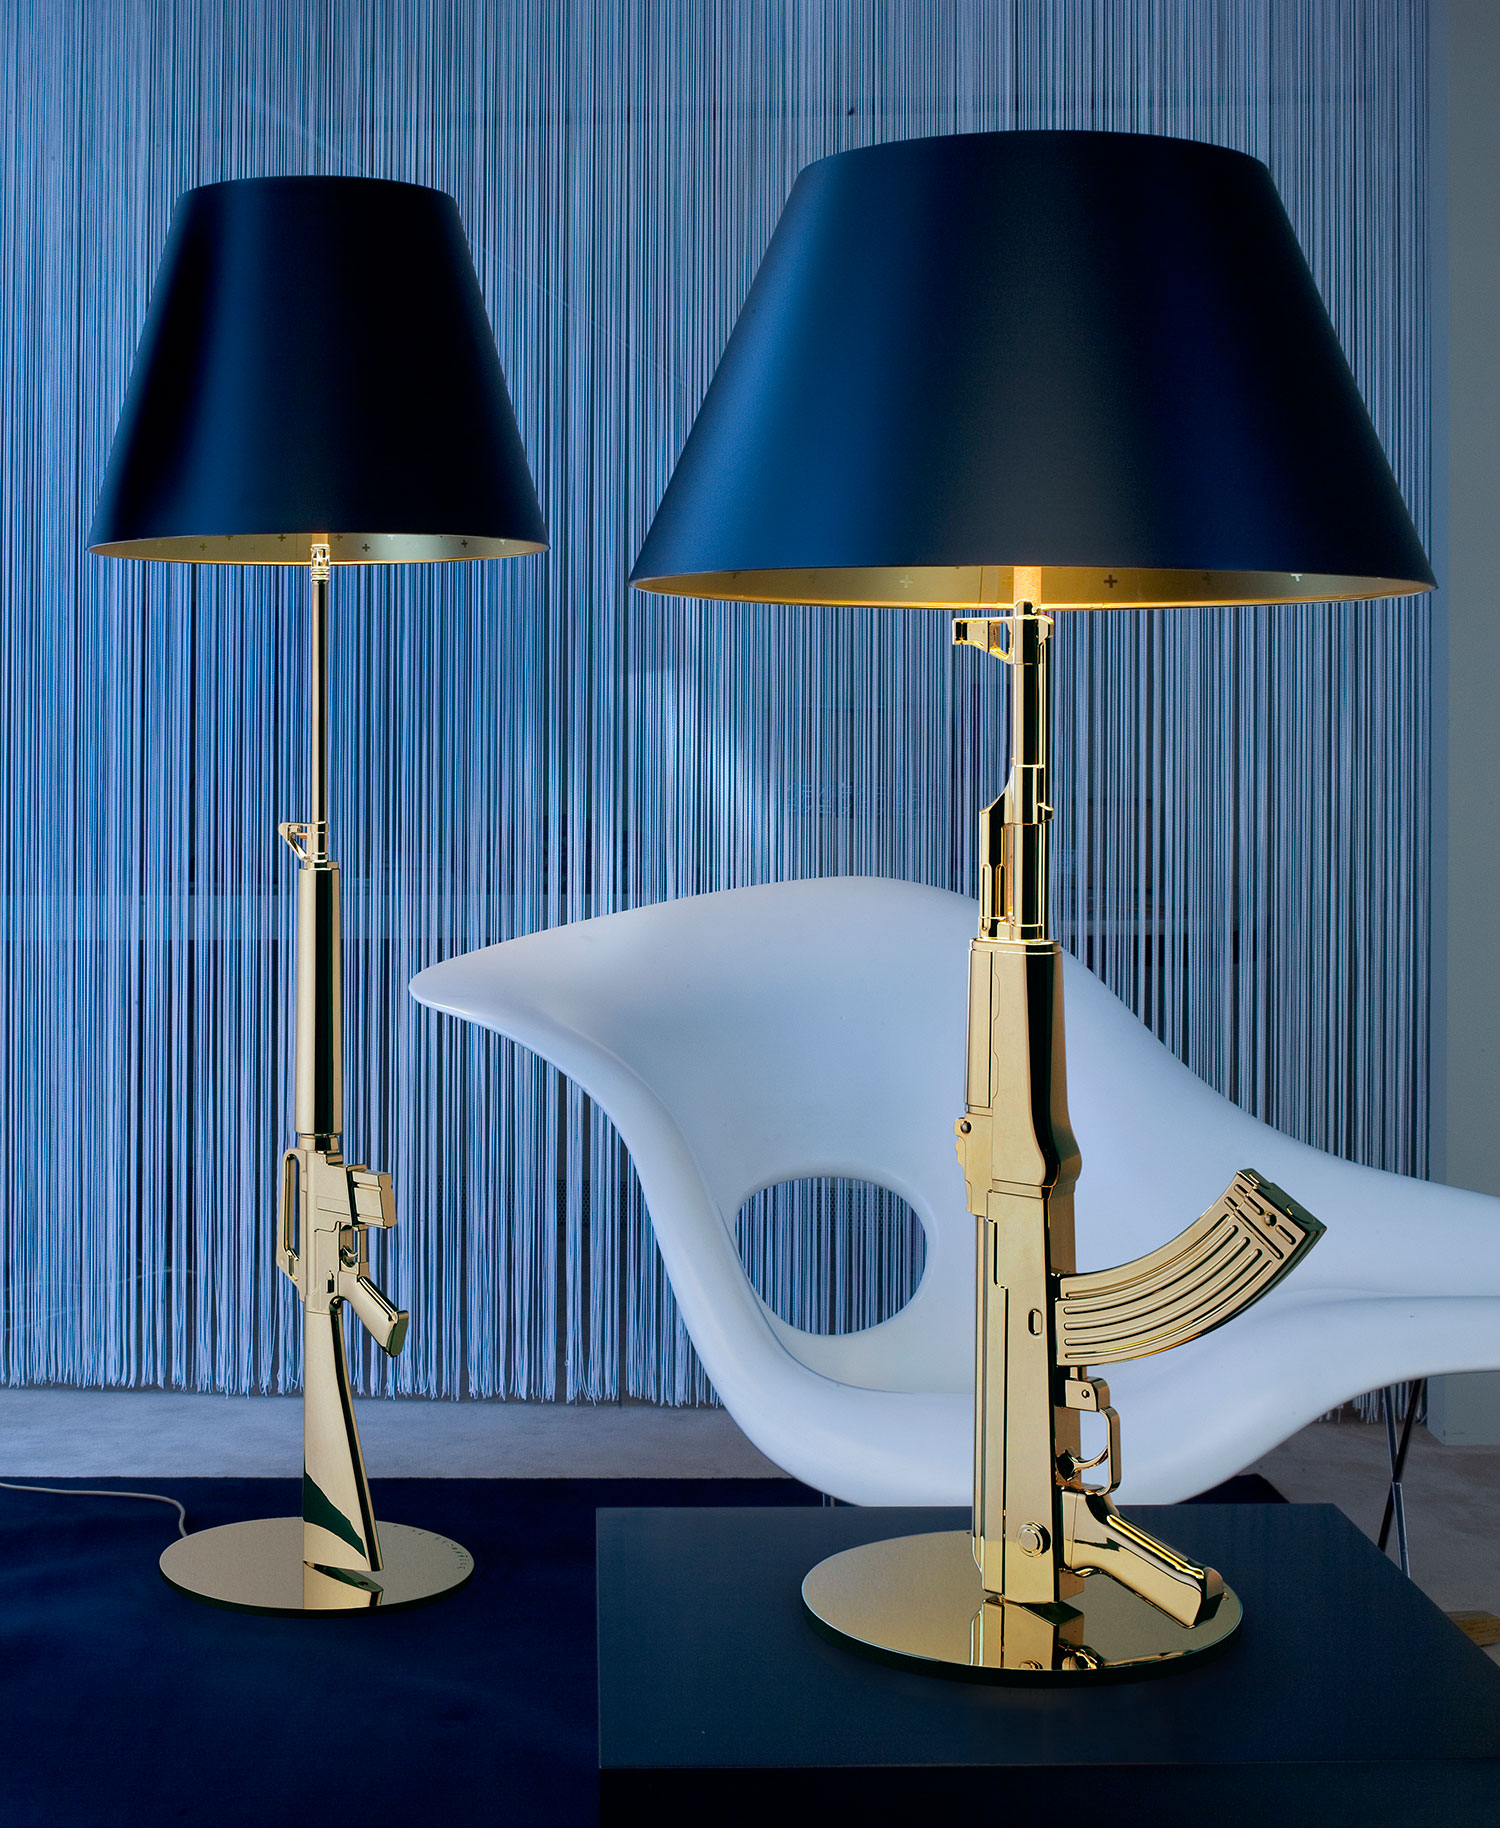 Flos Gun Lamp | We bet you didn't know this about Philippe Starck's design